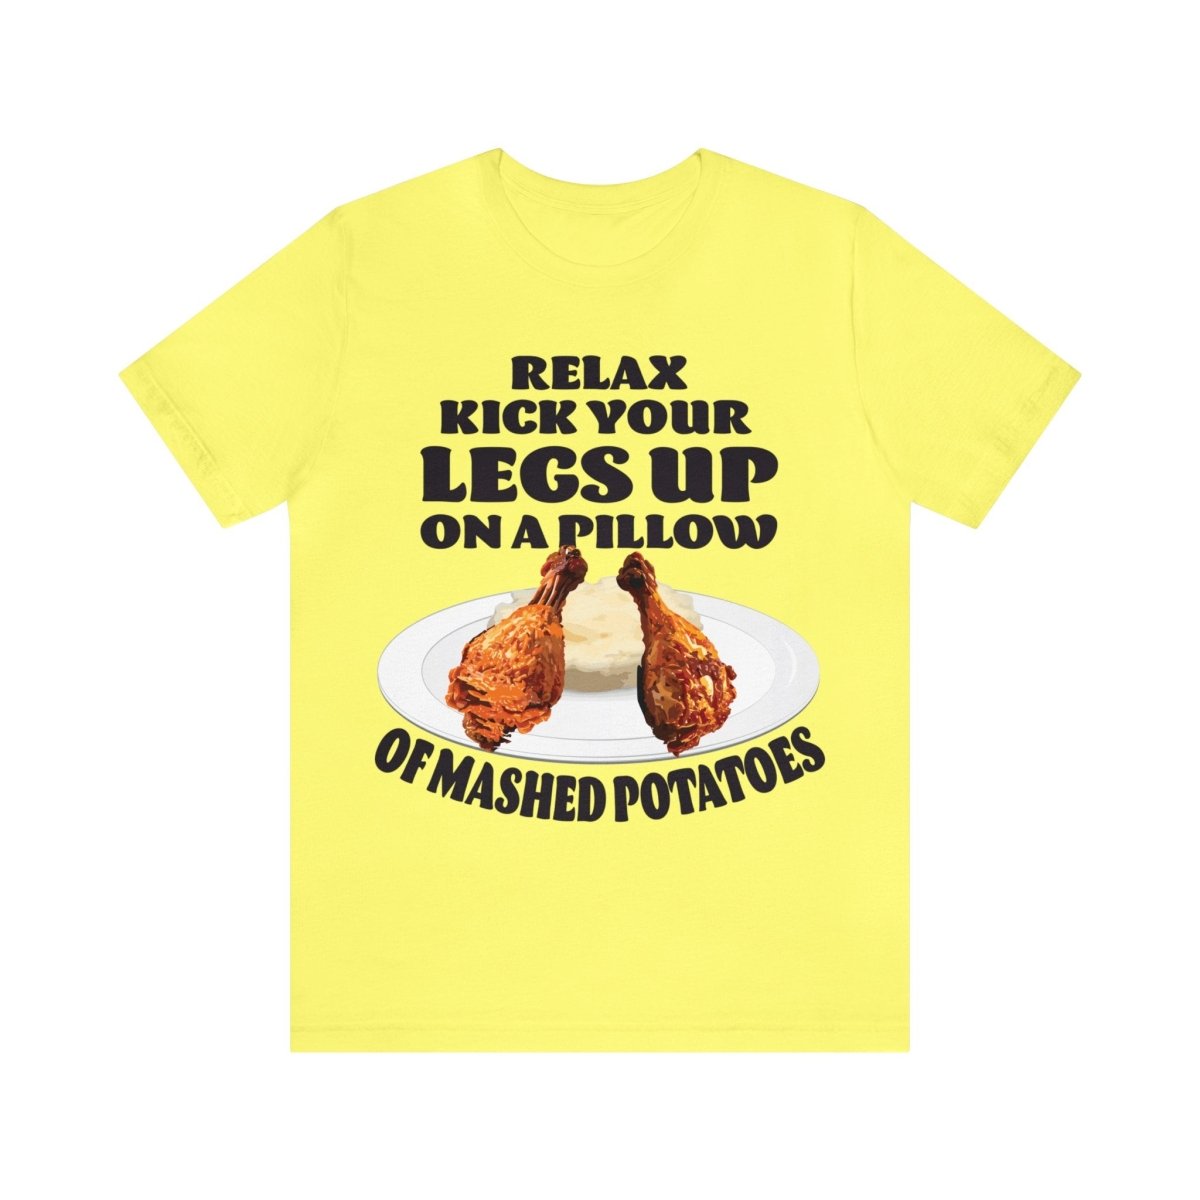 Fried Chicken Legs Up Premium T-Shirt, Relax, Kick Your Legs Up On A Pillow - Of Mashed Potatoes, Funny, Food or Cook Gift